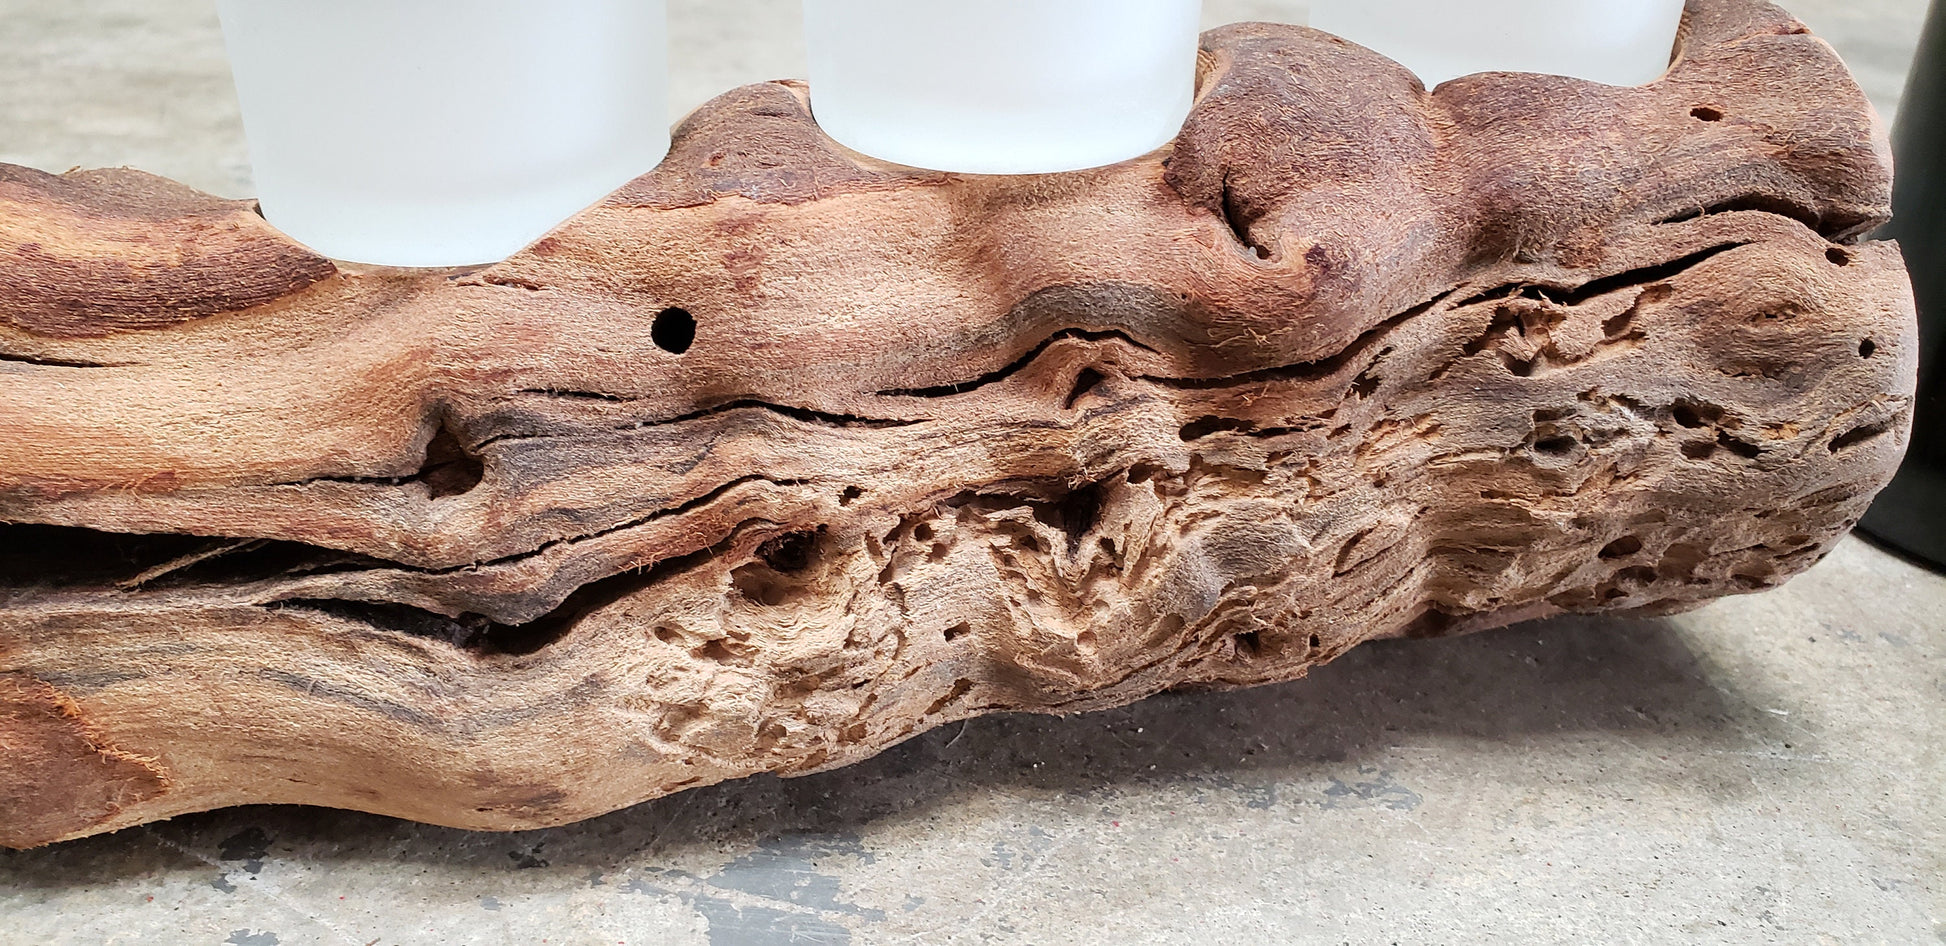 Grapevine Candle Holder 0502 Retired Justin Winery California Cabernet grape vine wood. 100% Recycled!